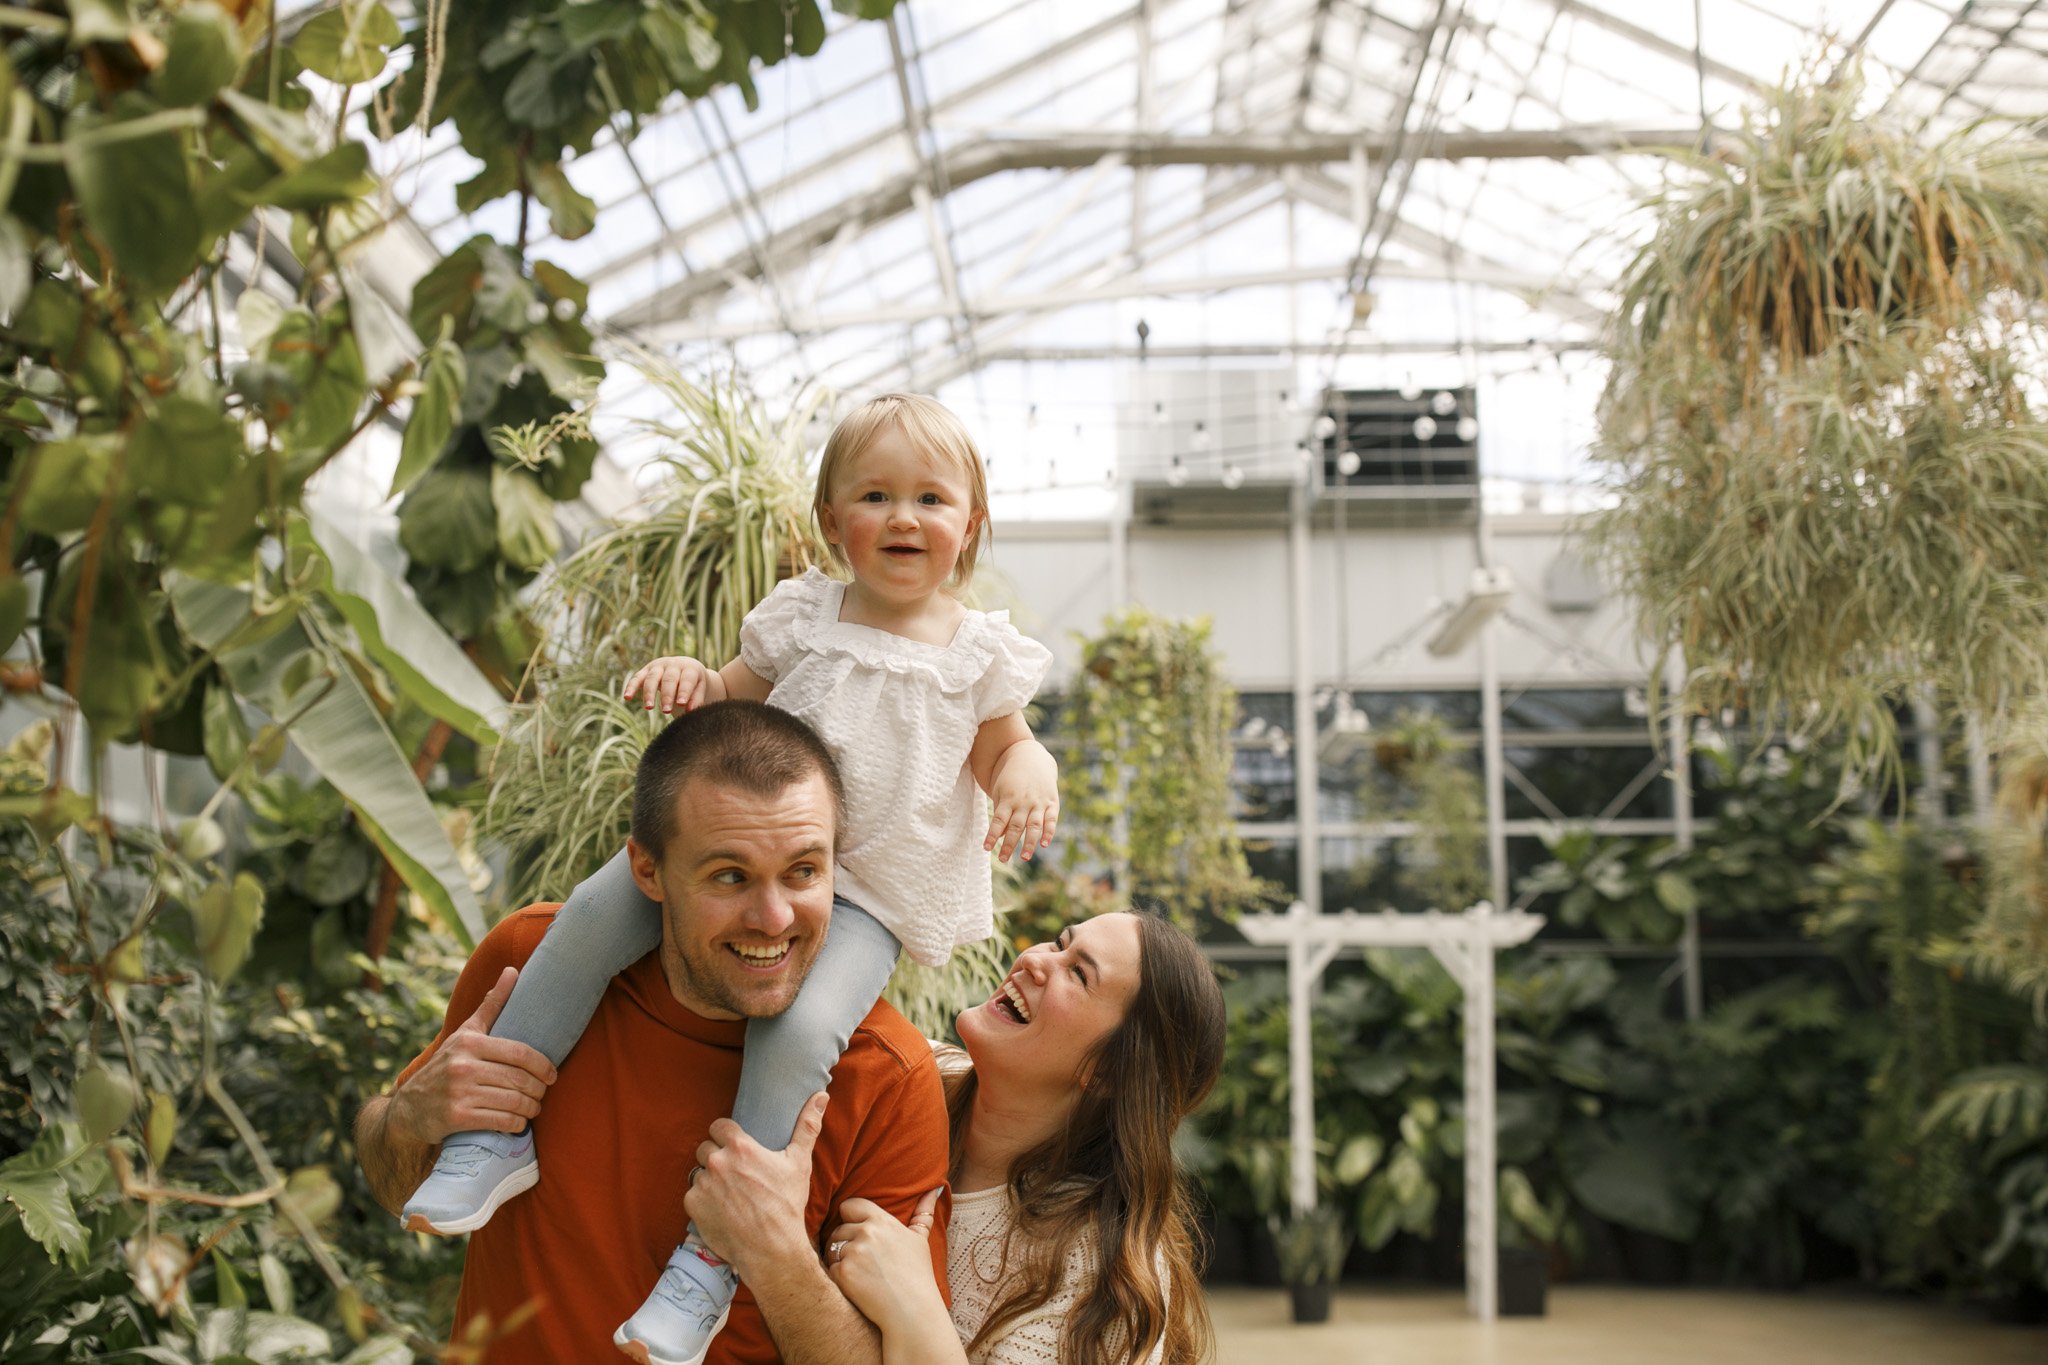 Grand Rapids Downtown Market Greenhouse - Grand Rapids Family Photographer - Grand Rapids Family Mini Session - Brown Family - Downtown Market - Jessica Darling - J Darling Photo115.jpg